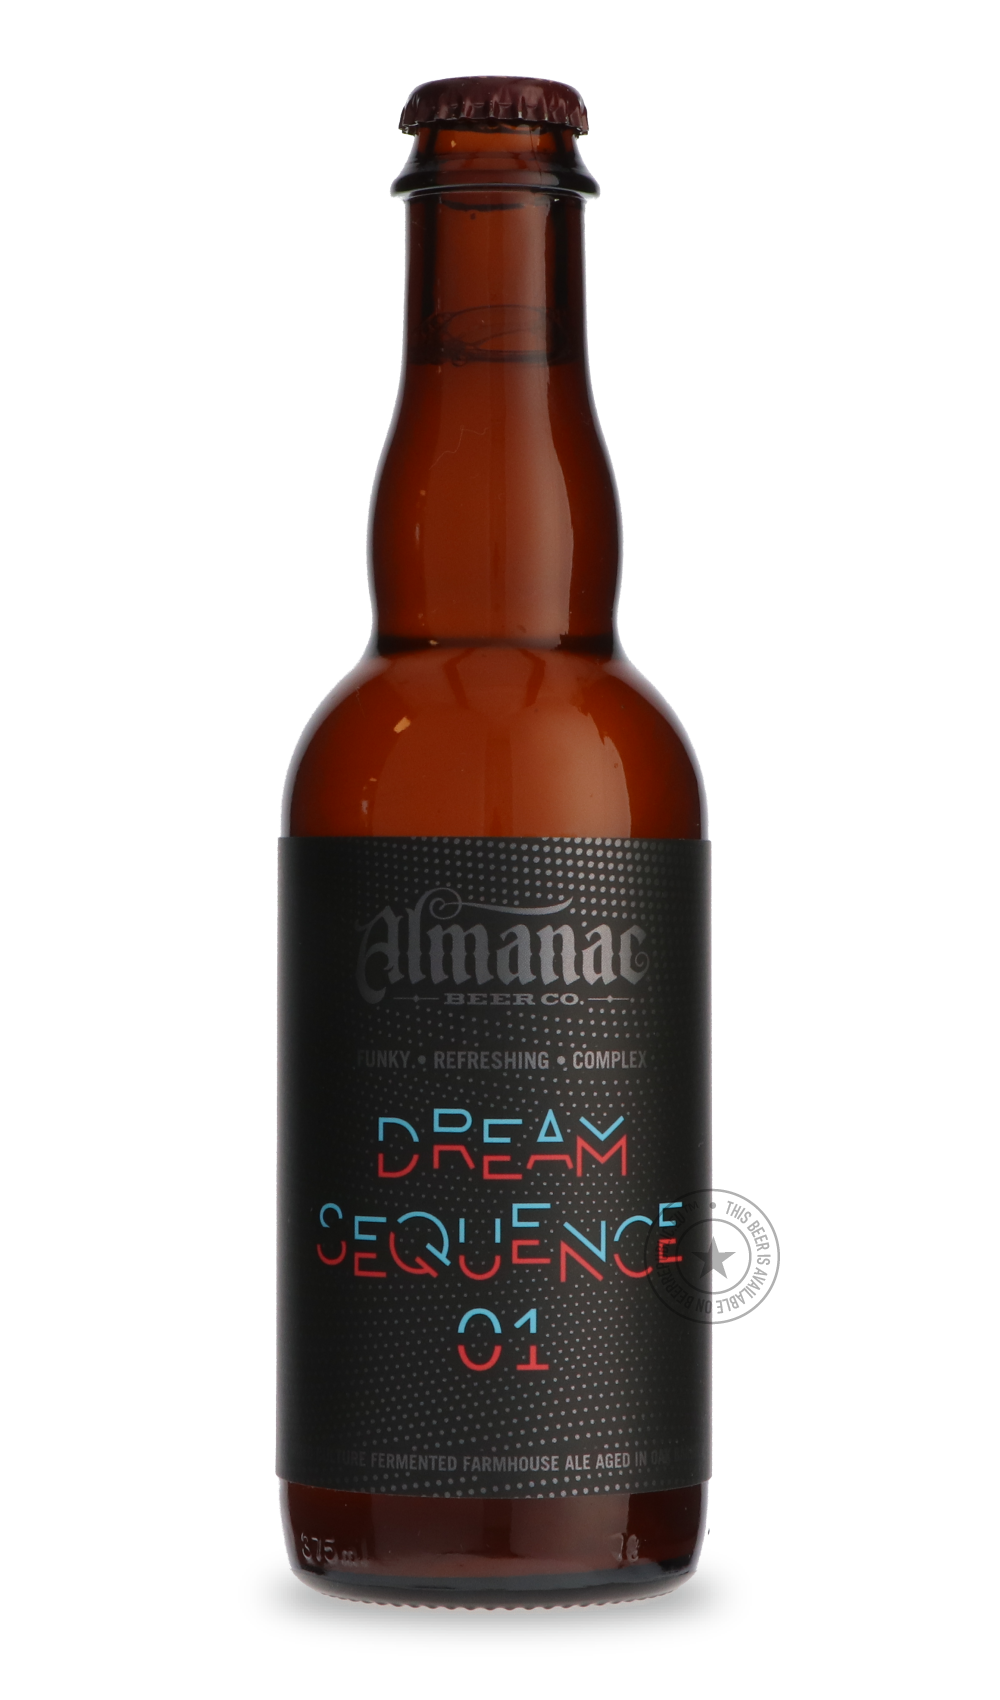 -Almanac- Dream Sequence 01-Sour / Wild & Fruity- Only @ Beer Republic - The best online beer store for American & Canadian craft beer - Buy beer online from the USA and Canada - Bier online kopen - Amerikaans bier kopen - Craft beer store - Craft beer kopen - Amerikanisch bier kaufen - Bier online kaufen - Acheter biere online - IPA - Stout - Porter - New England IPA - Hazy IPA - Imperial Stout - Barrel Aged - Barrel Aged Imperial Stout - Brown - Dark beer - Blond - Blonde - Pilsner - Lager - Wheat - Weize